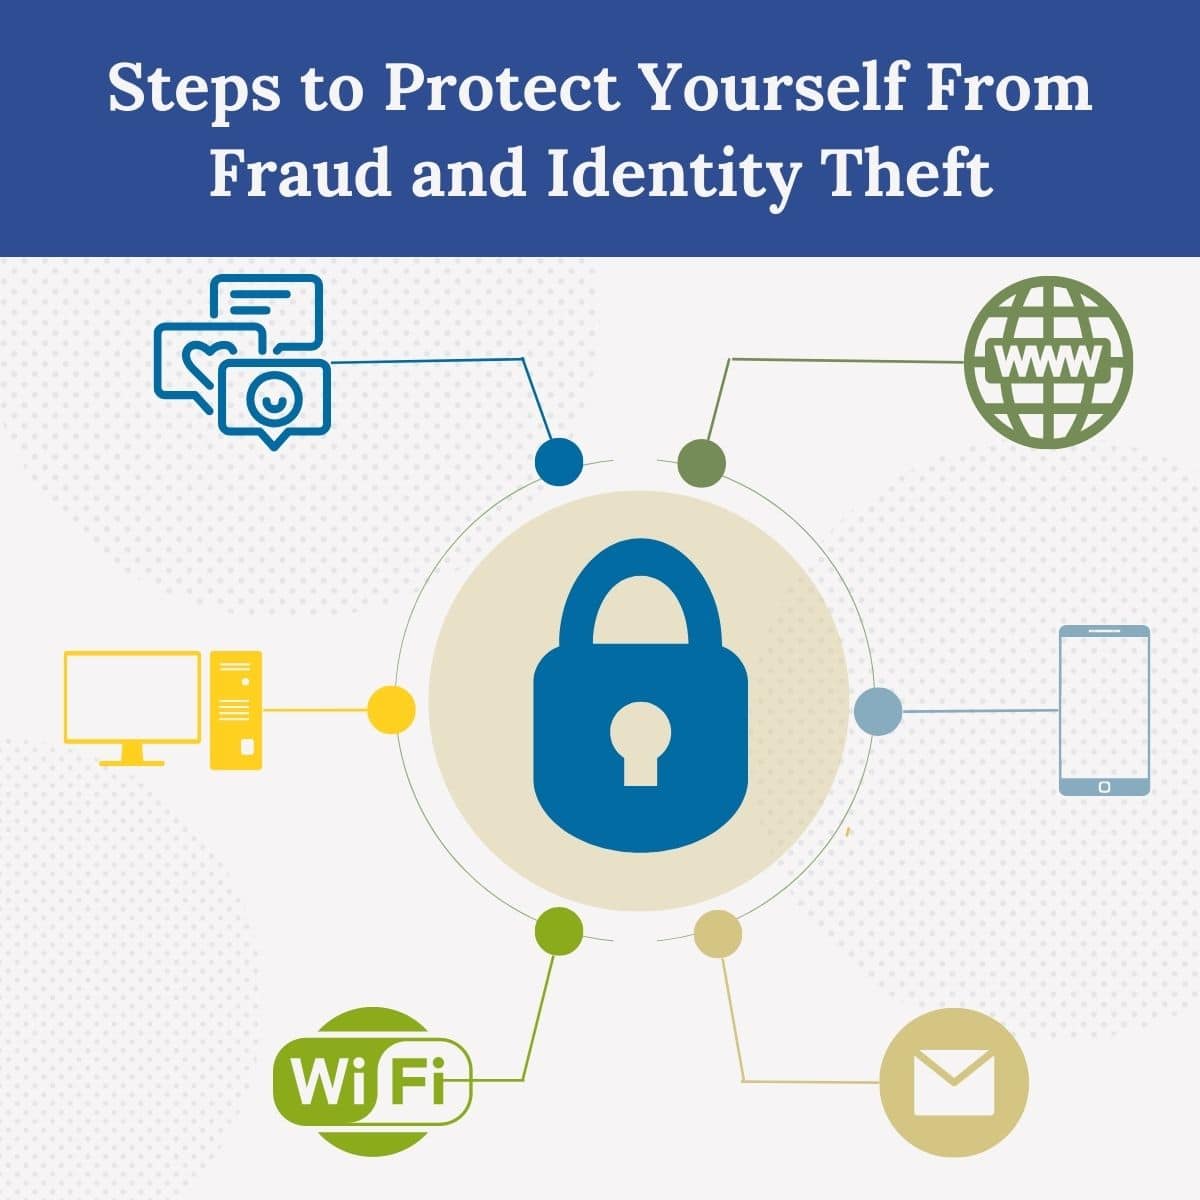 Steps to Protect Yourself from Fraud and Identity Theft